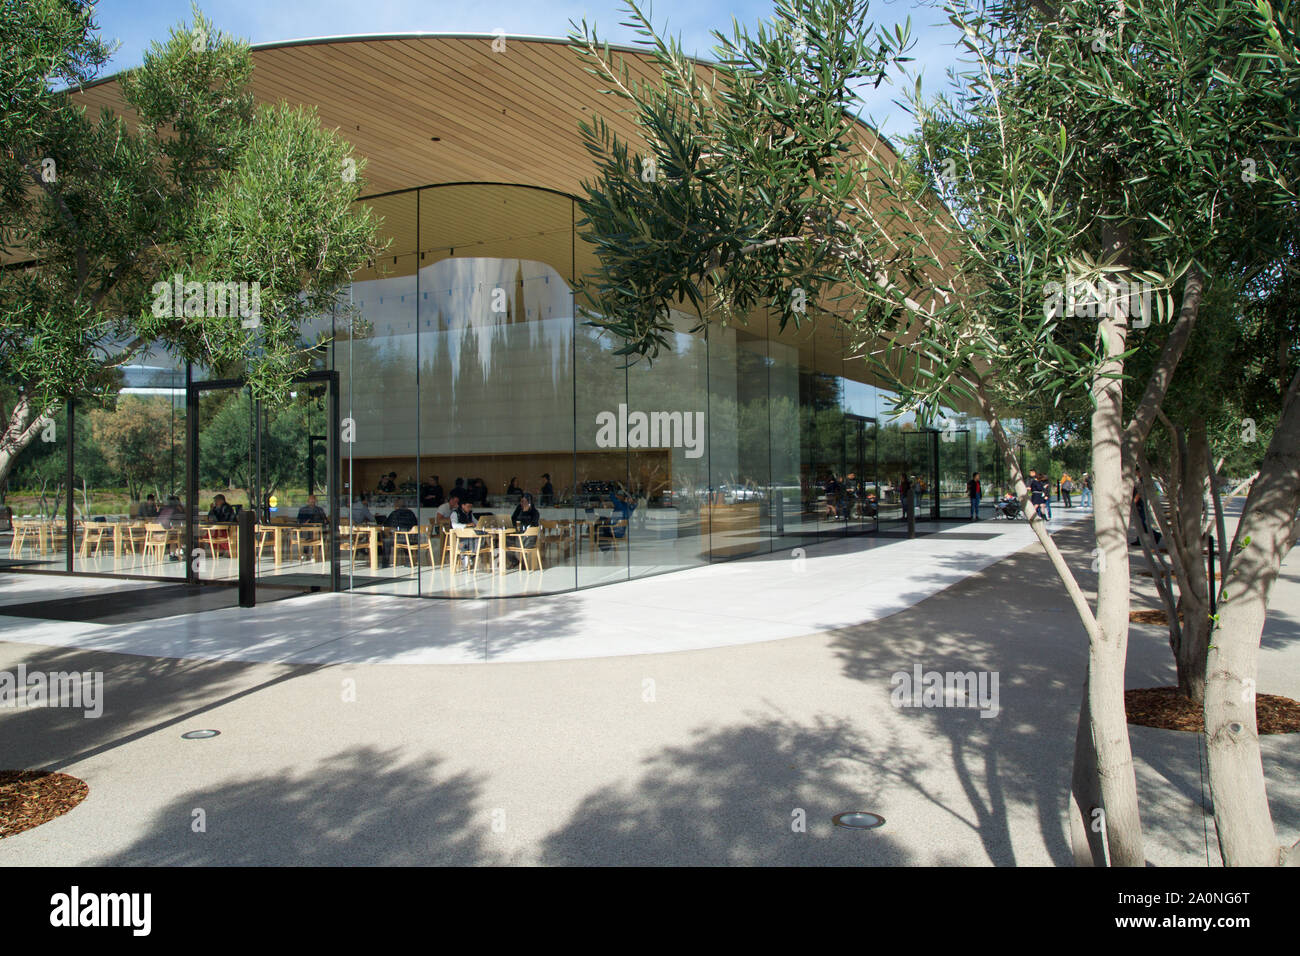 CUPERTINO, CALIFORNIA, UNITED STATES - NOV 26th, 2018: Exterior view of the new and modern Apple Park visitor center located next to their new Stock Photo